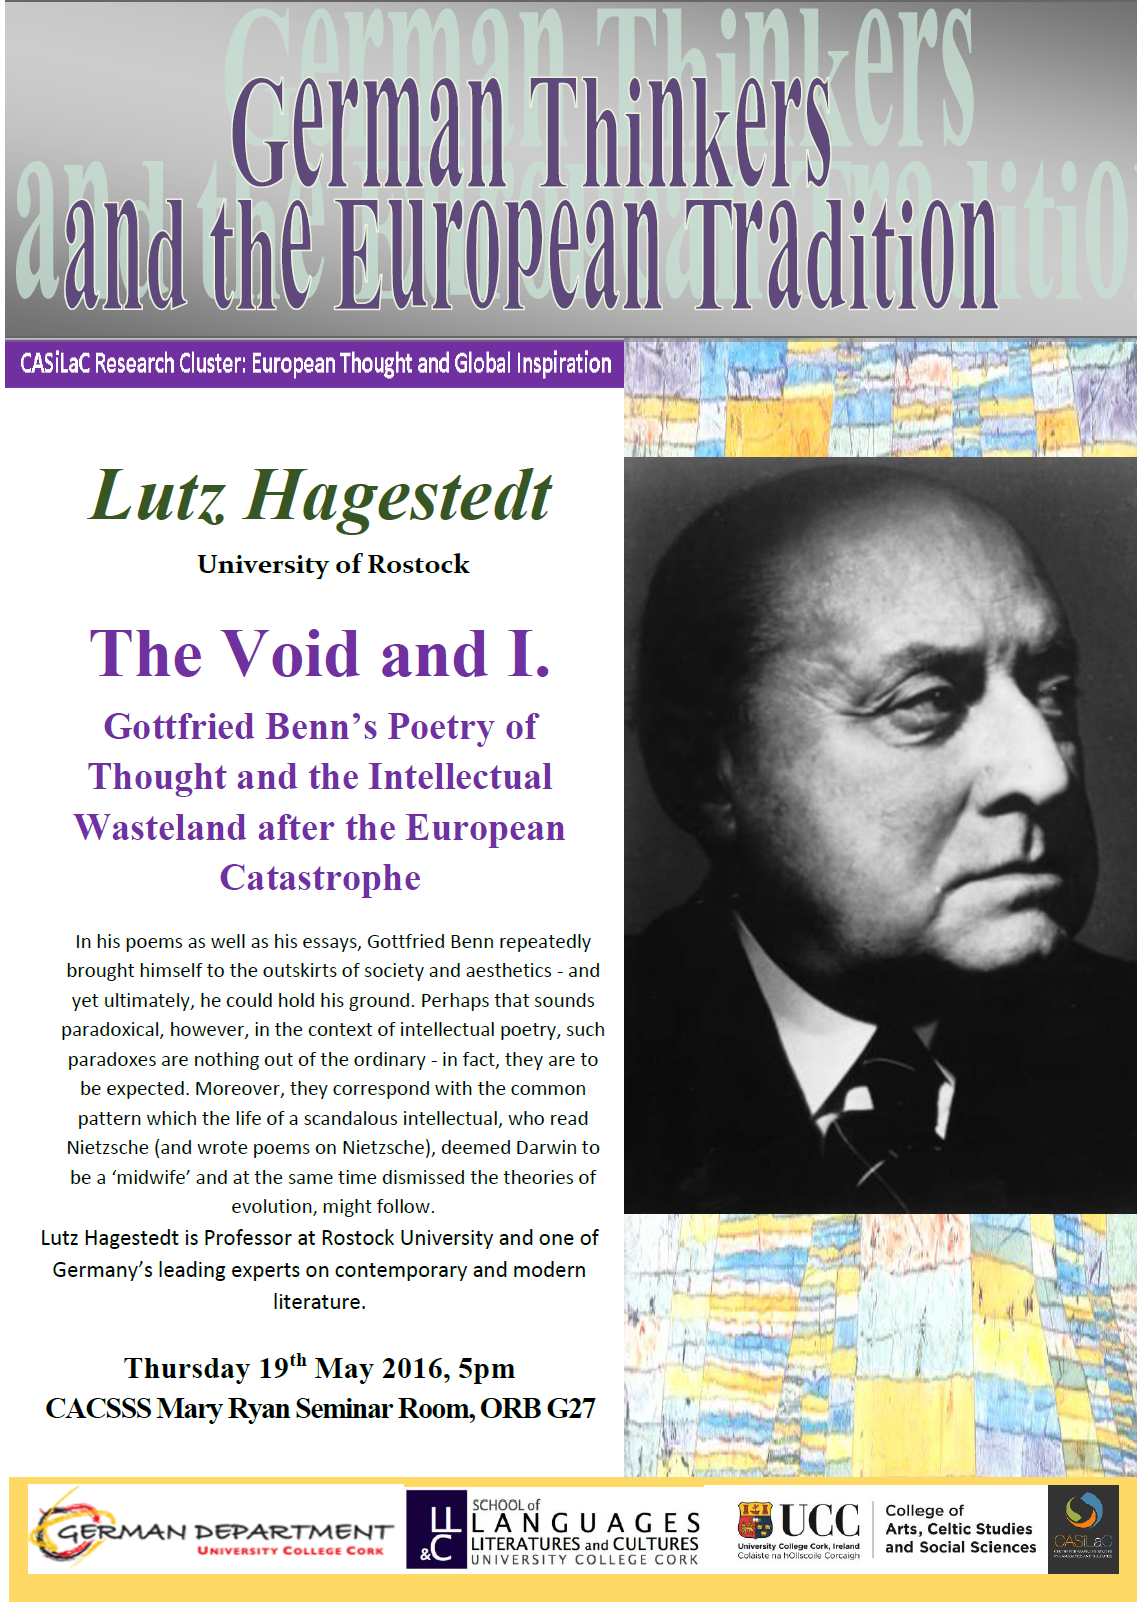 Lutz Hagestedt, University of Rostock, presents 'The Void and I.'

